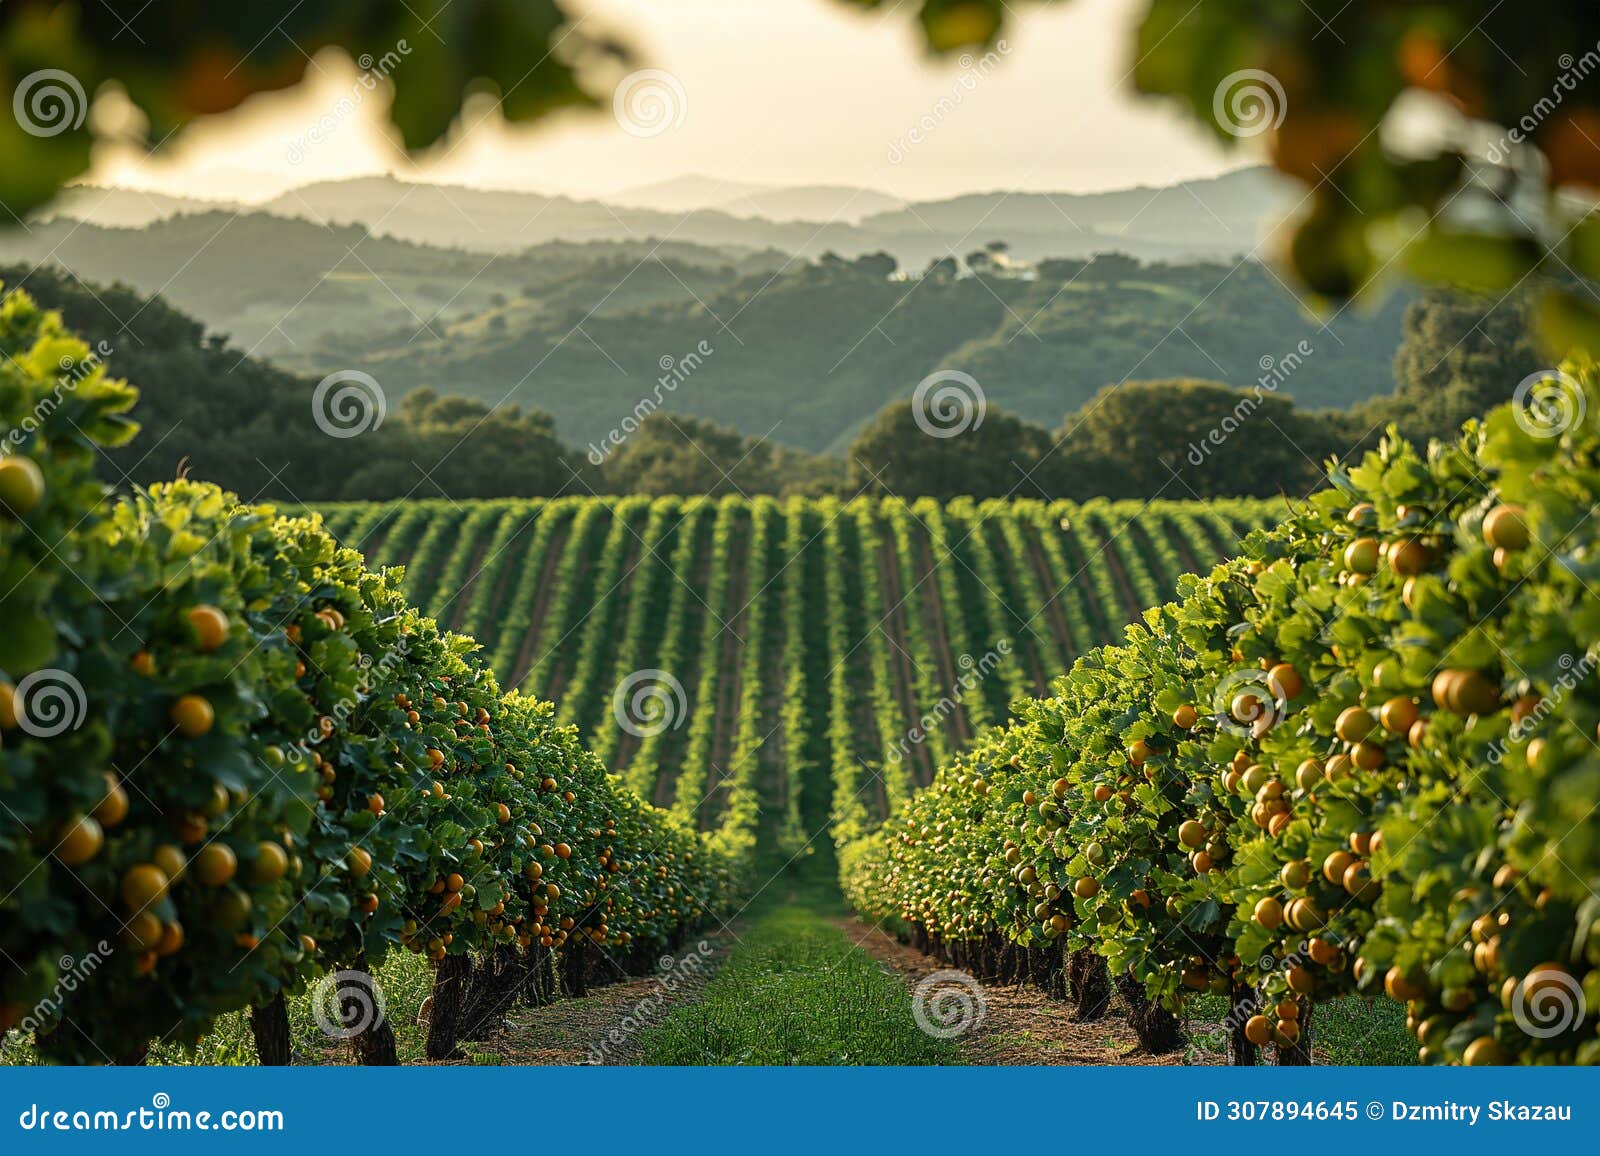 view of citrus orchards on the hillsides